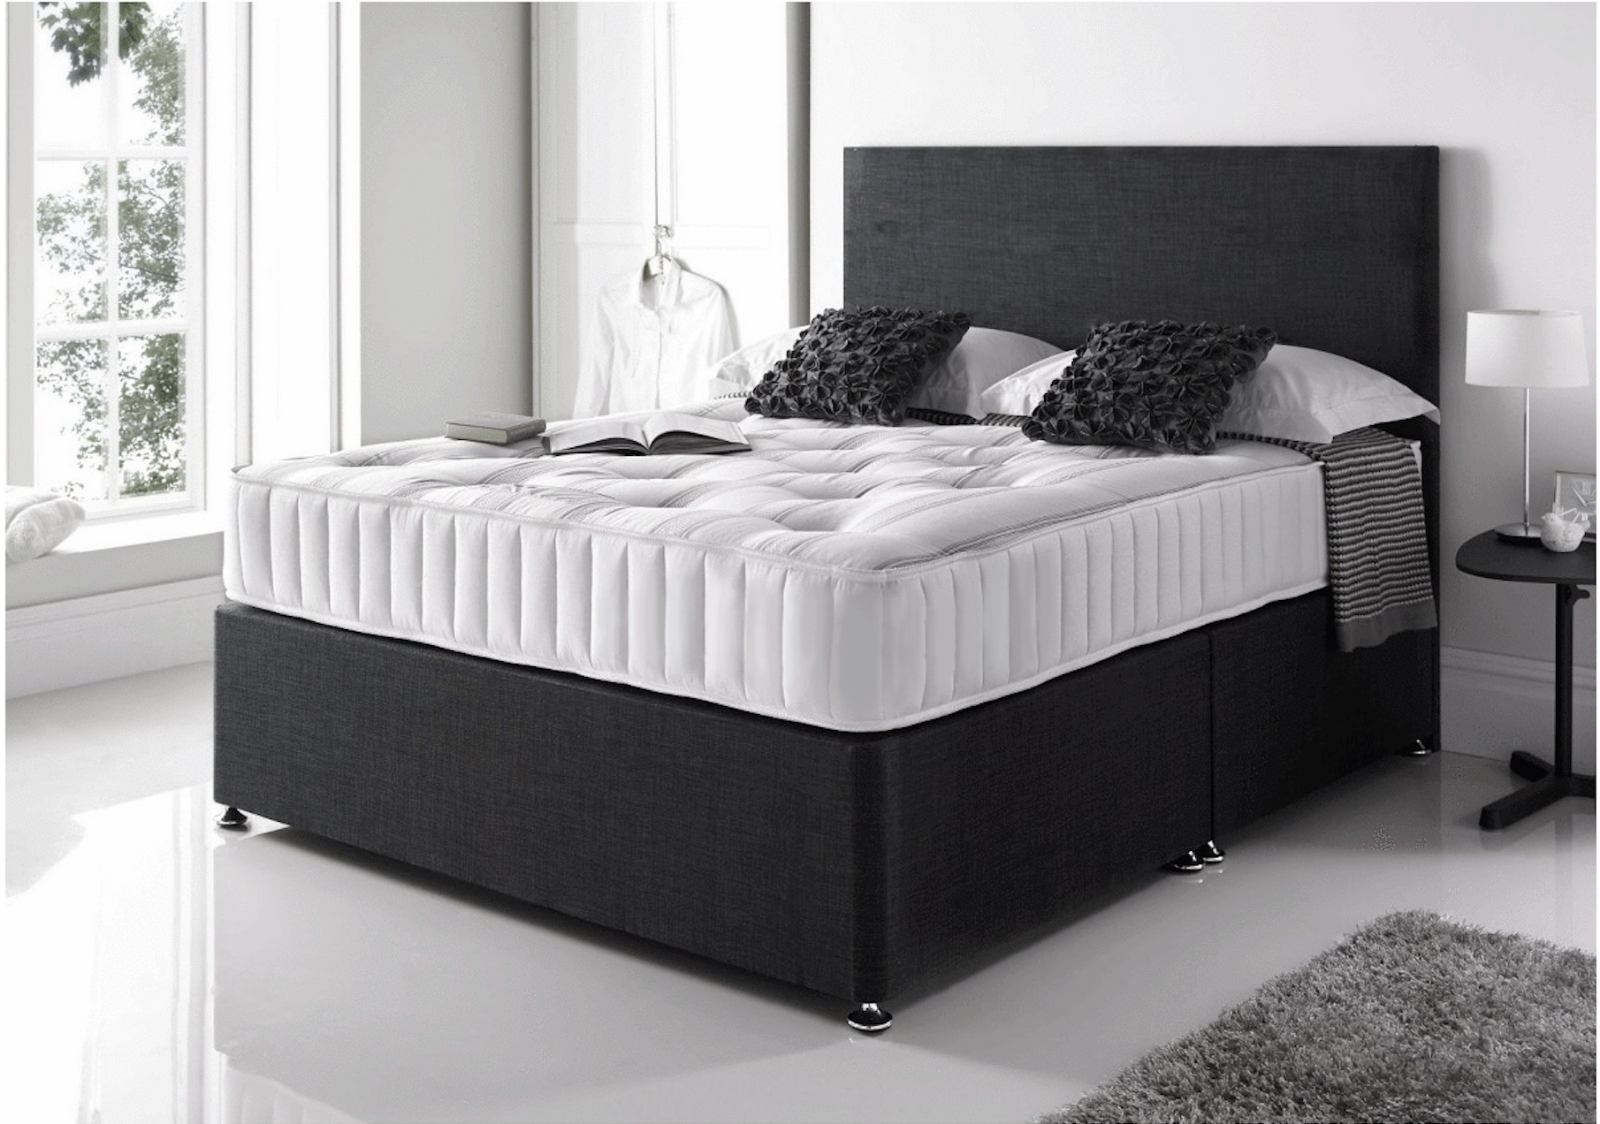 are mattress included in sofa beds